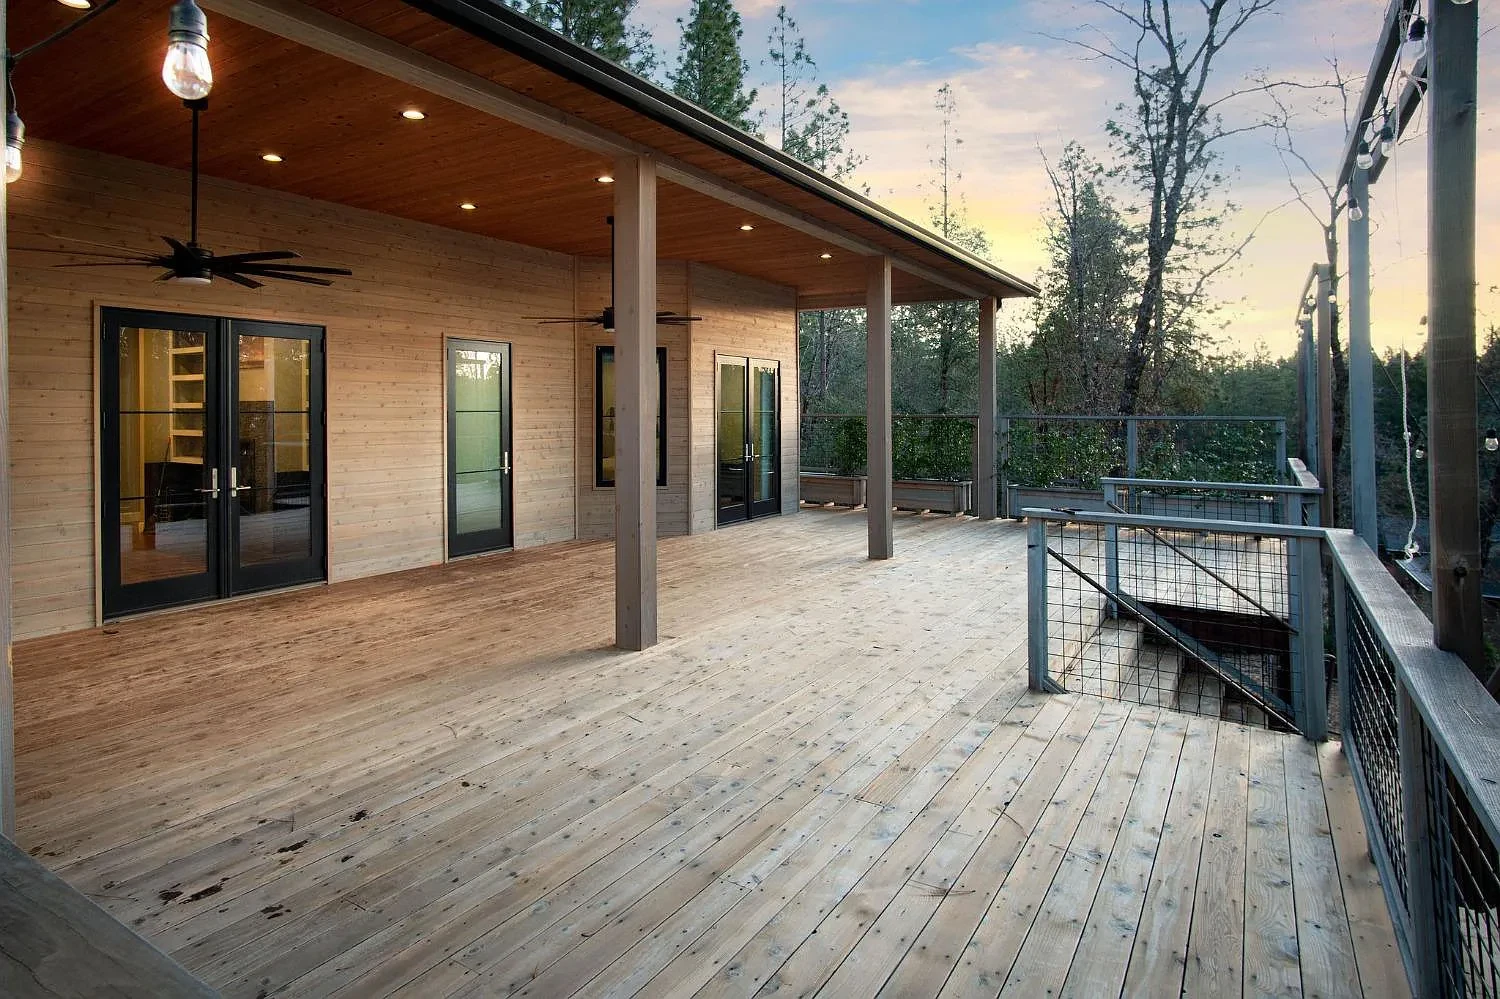 Deck Installation for Home Hardening Solutions Inc. in Grass Valley, CA